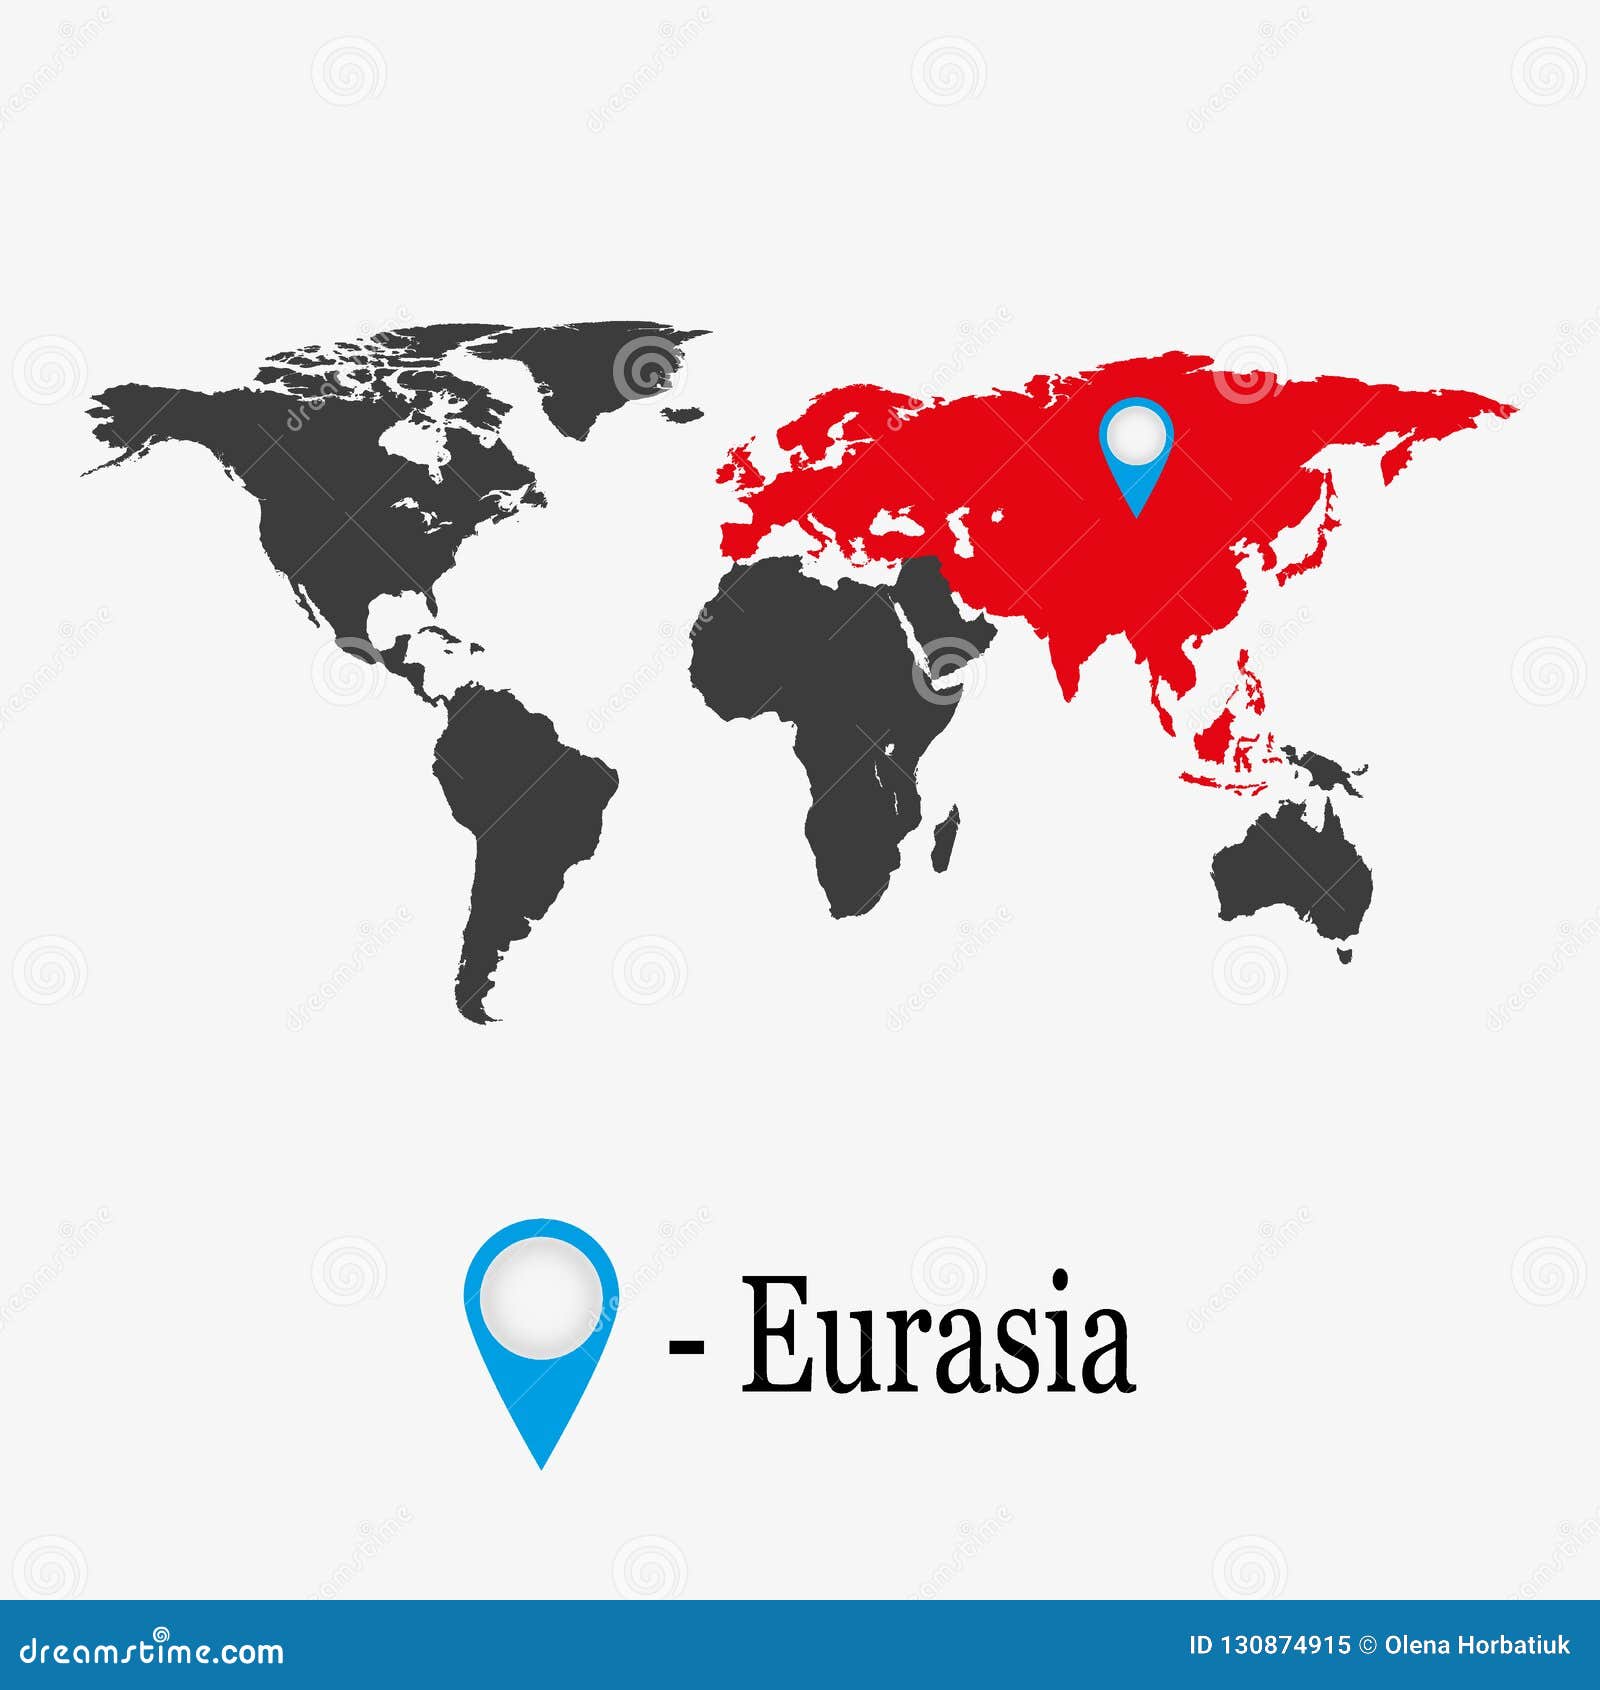 Top 104+ Images where is eurasia located on a world map Completed